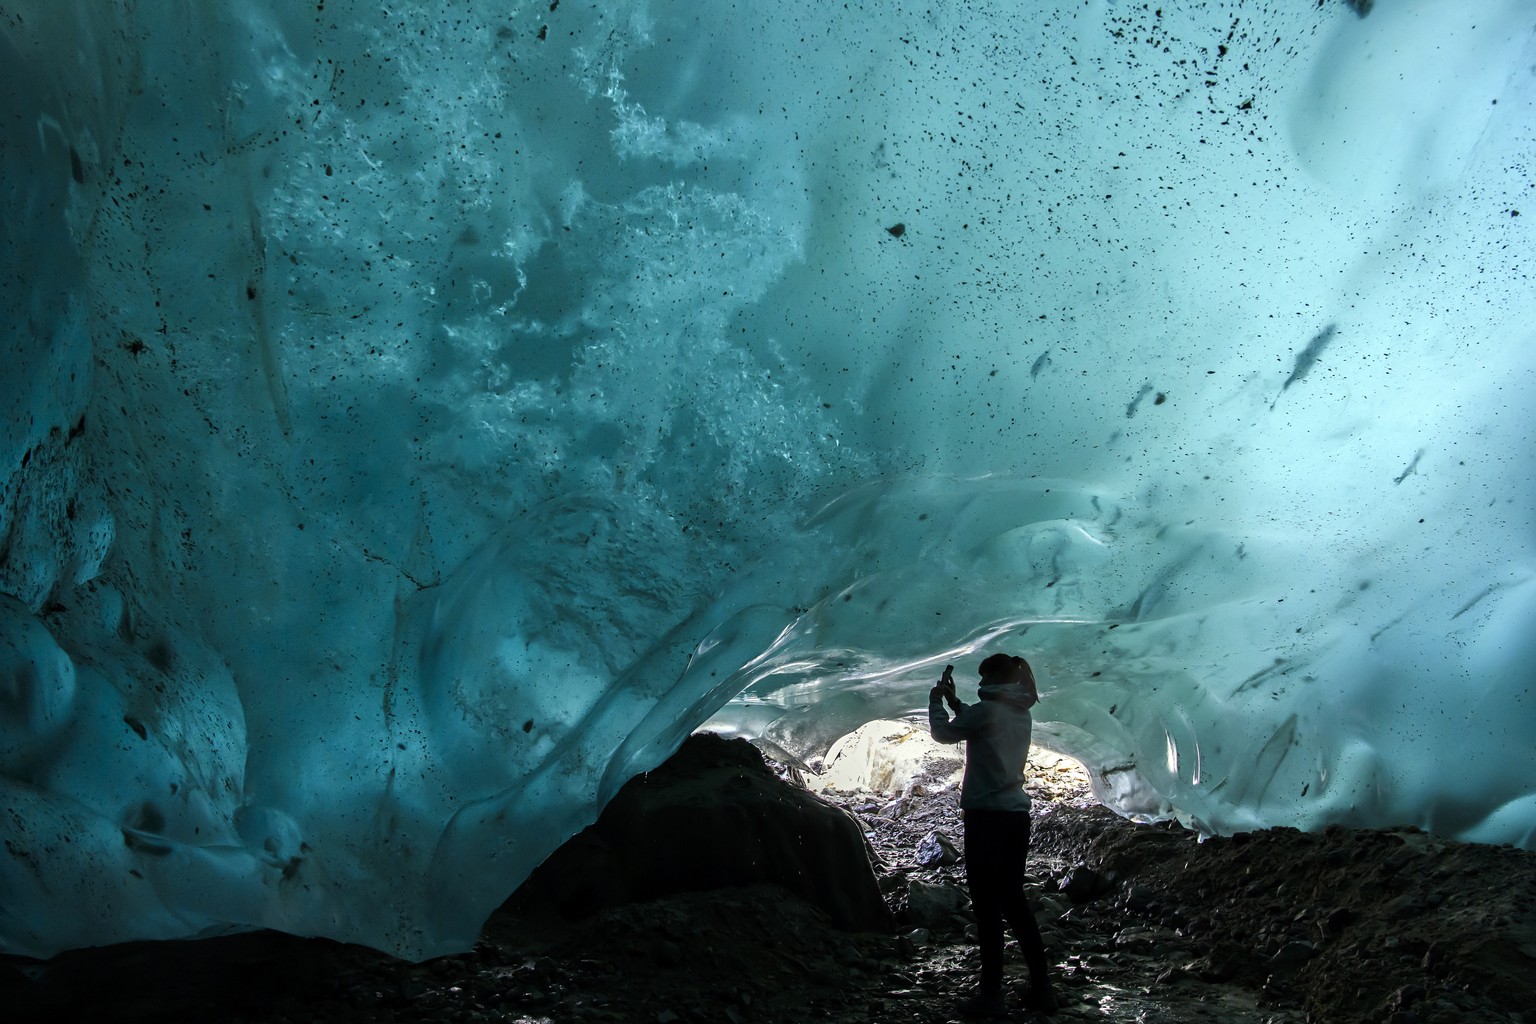 Stefanie takes a picture in an ice cave in the Swiss Aletsch Glacier, during an autumn day, in Valais, Switzerland, Wednesday, September 25, 2019. The Swiss Aletsch glacier, one of the largest ice str ...